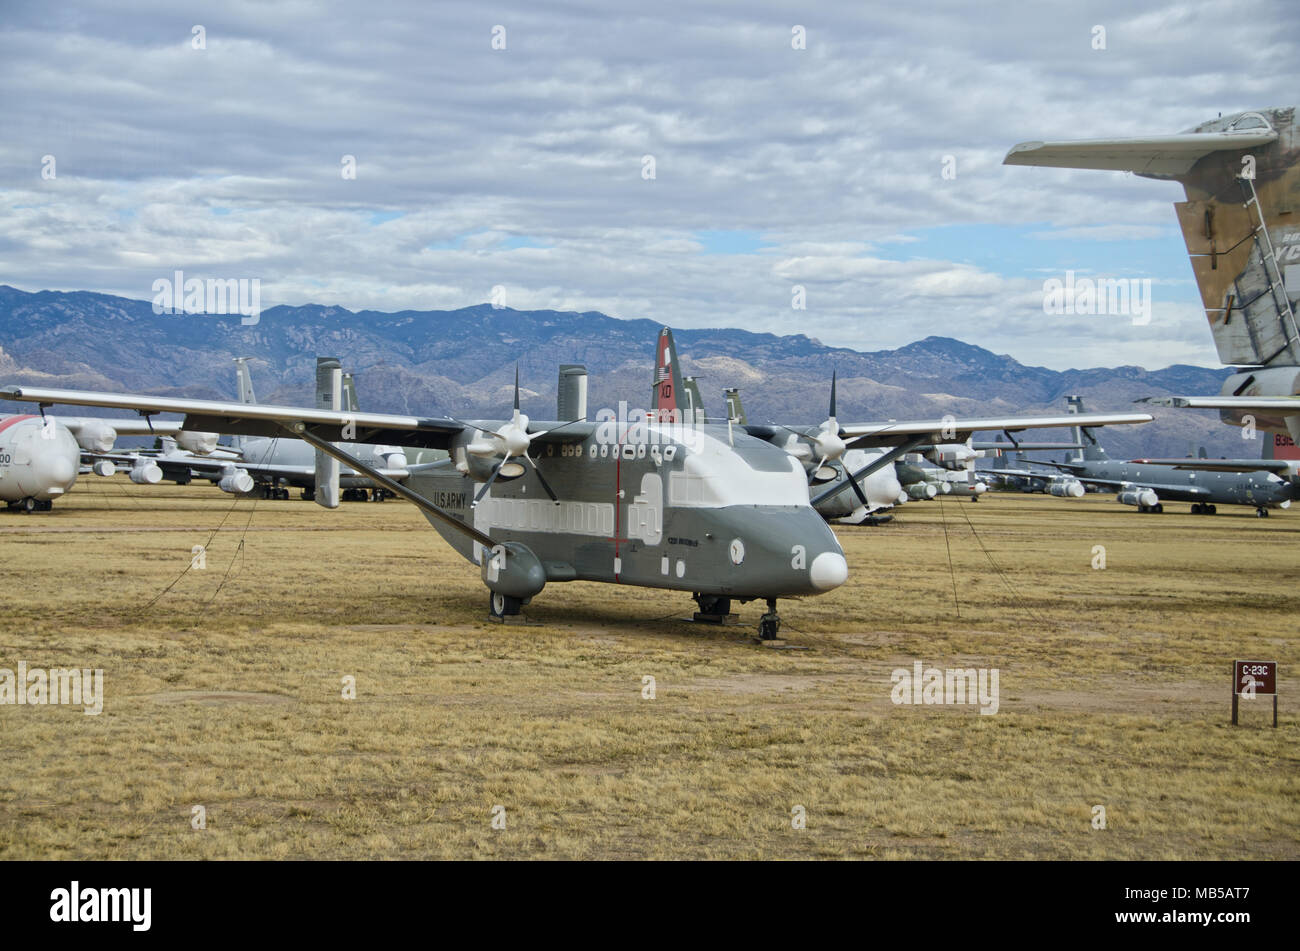 These aircraft are currently retired at the AMARG Boneyard facility in Tucson, Arizona.  Some will be reconditioned and others will be parted out. Stock Photo